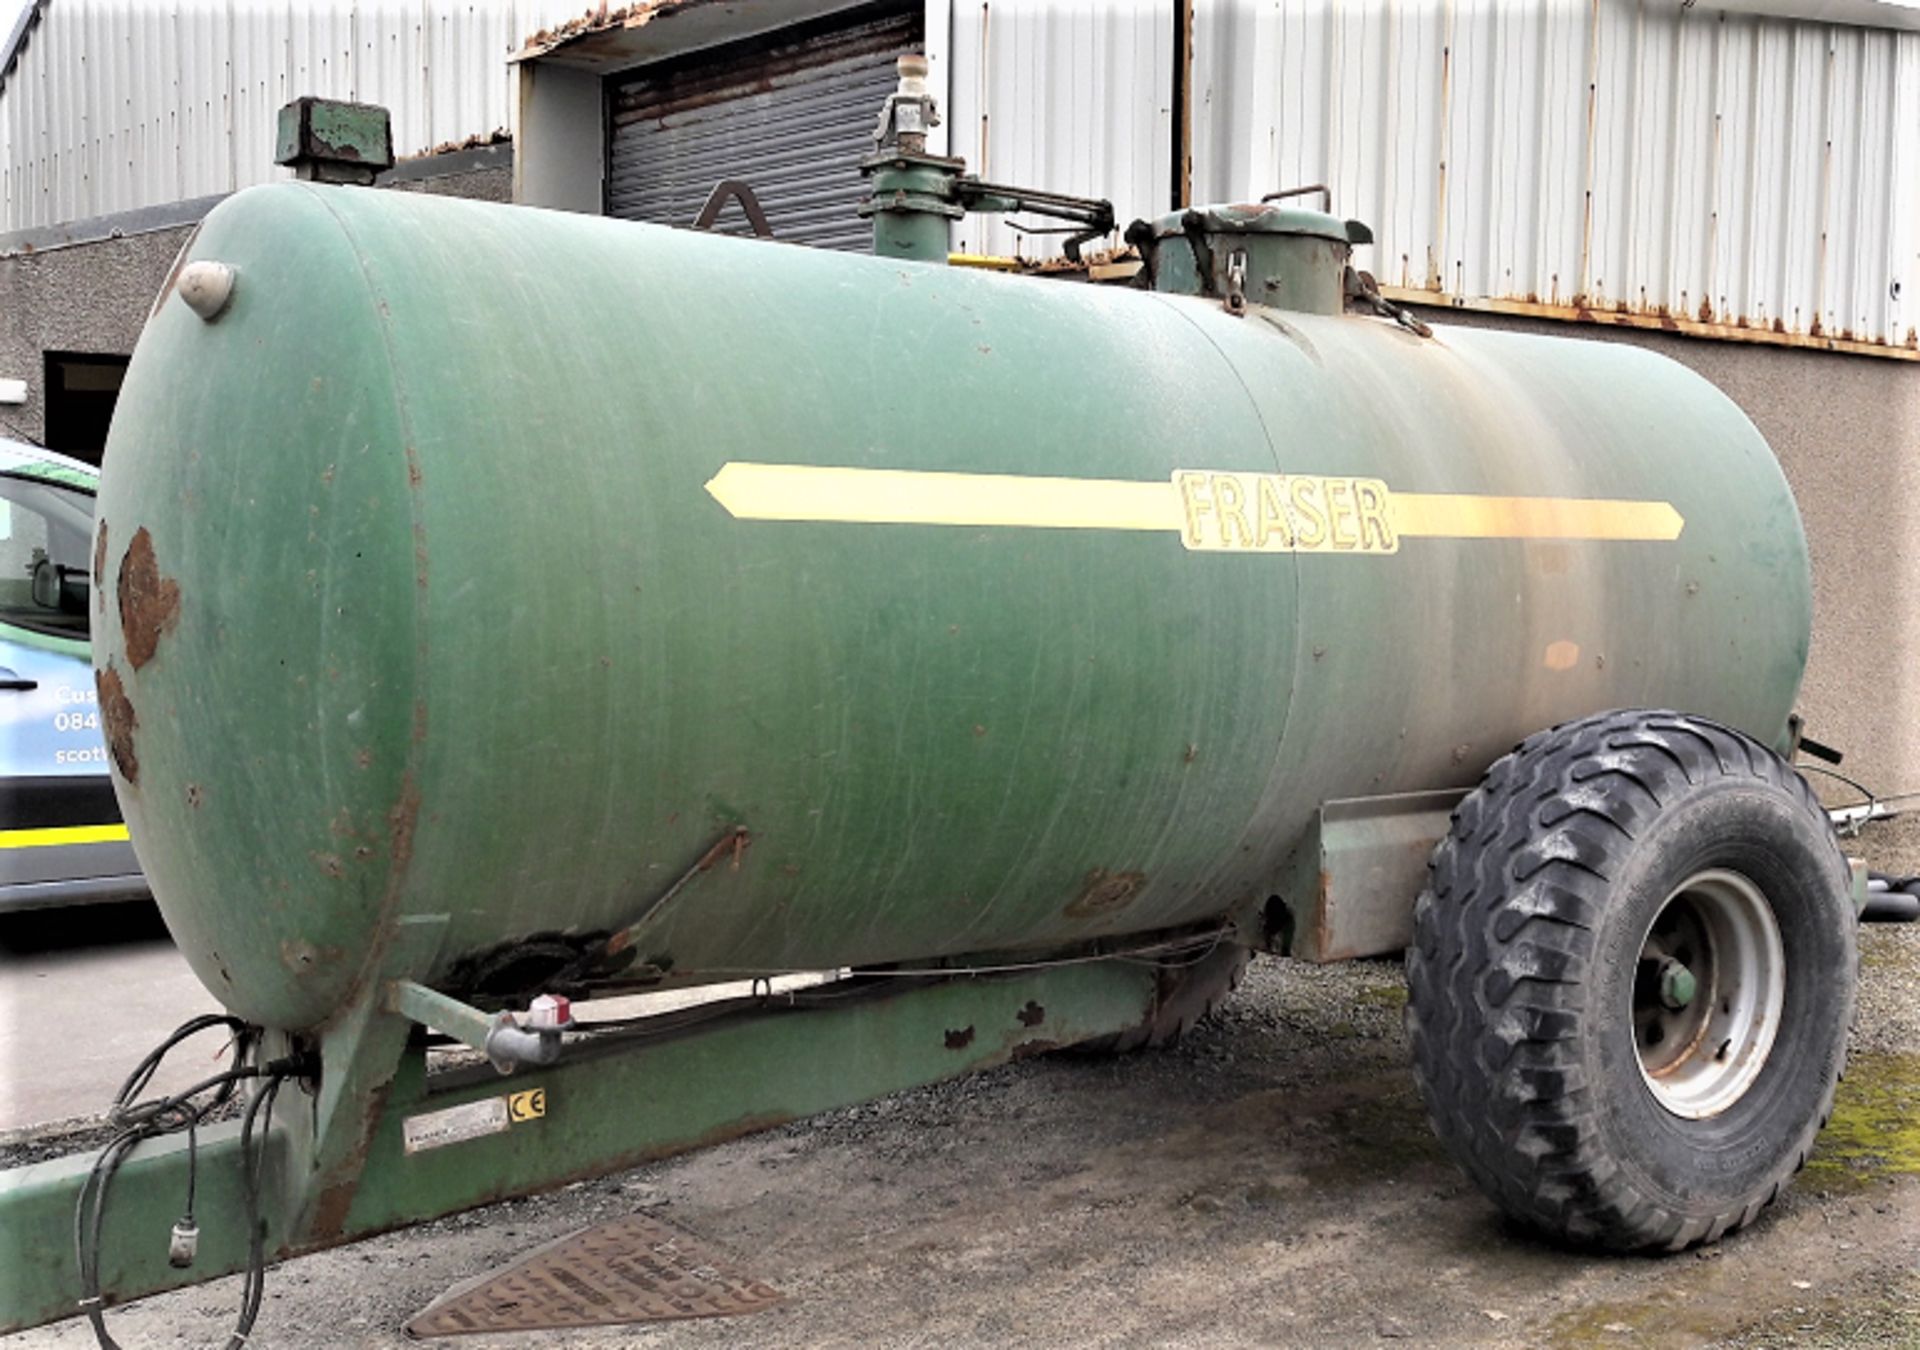 1994 FRASER SB7000 slurry tanker s/n1484. Sold from Errol auction site. Viewing and uplift from West - Bild 4 aus 5